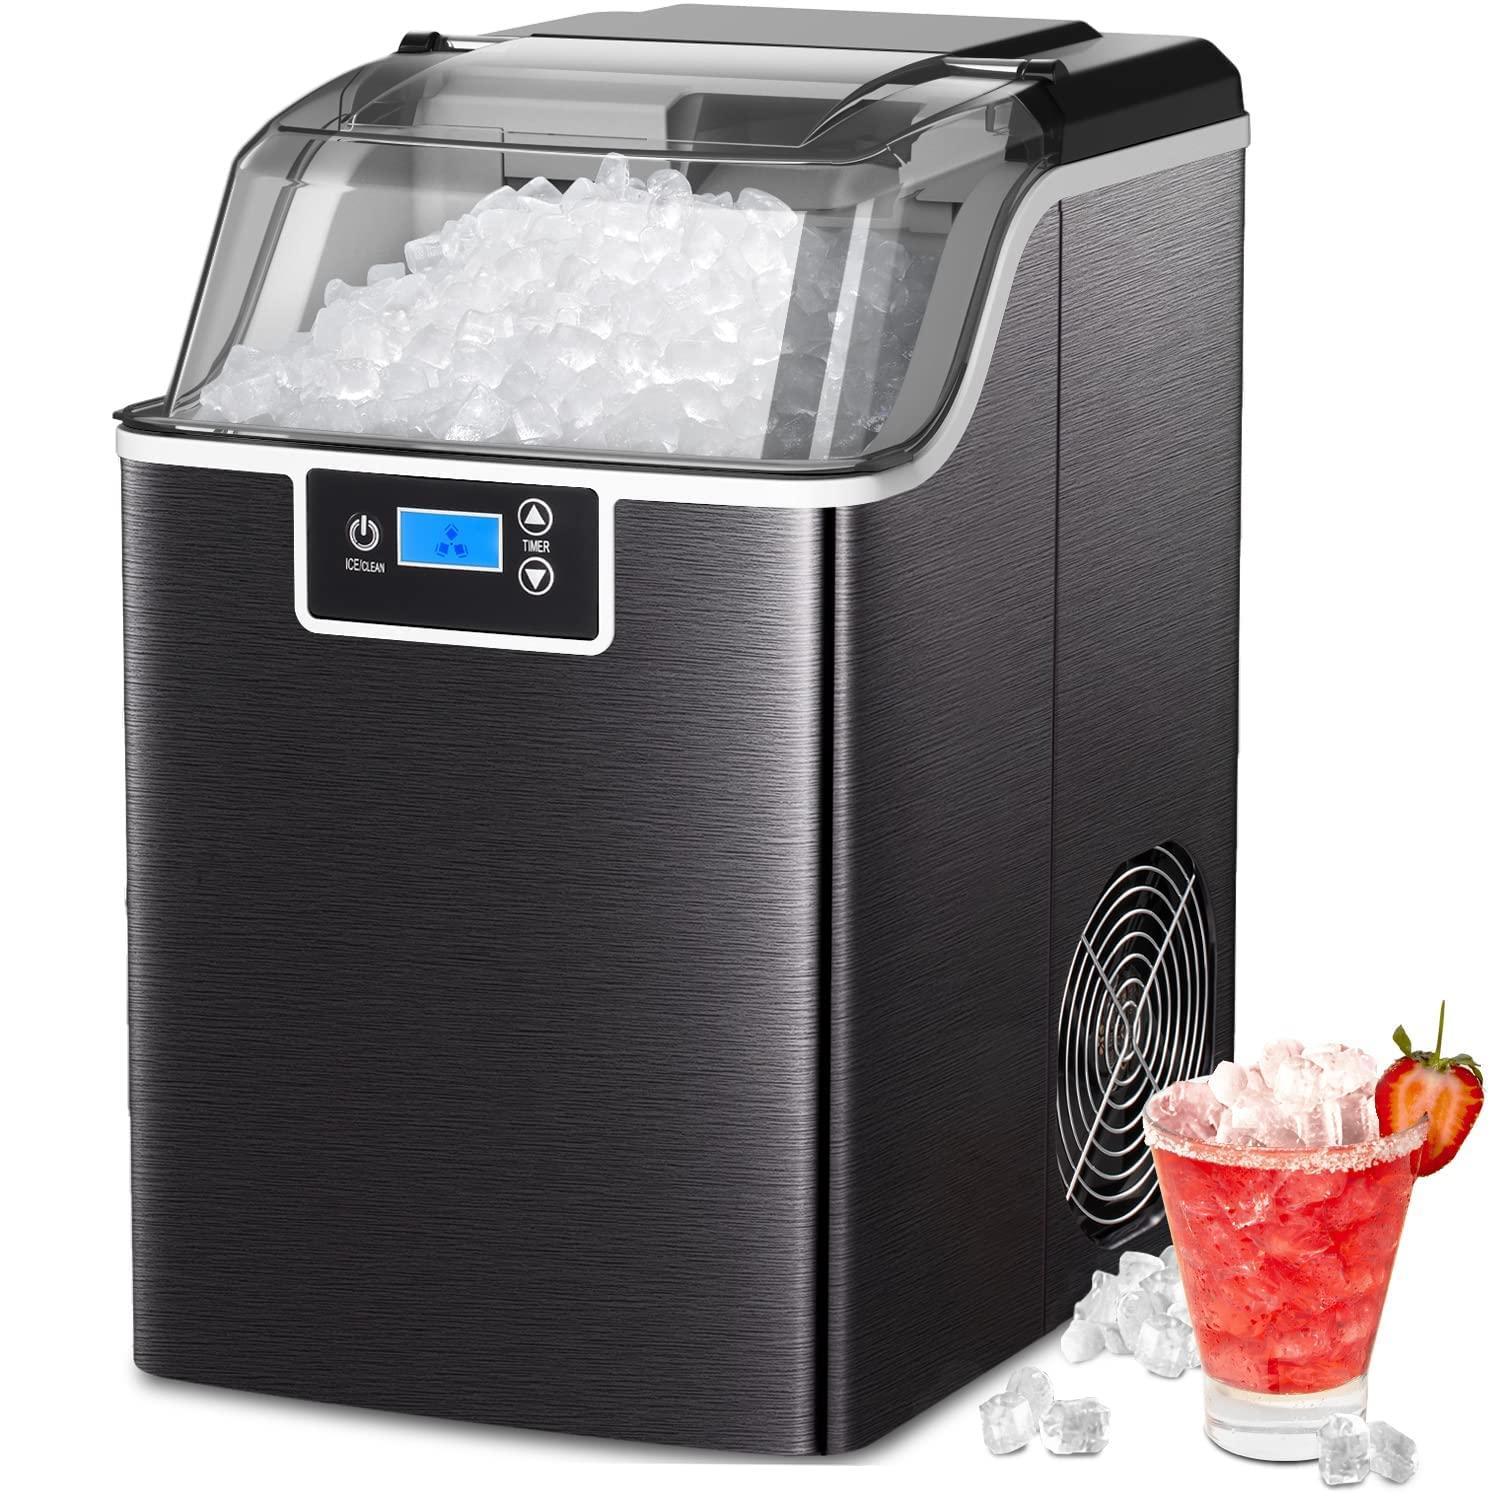 ADVWIN Nugget Ice Maker Countertop, Crushed Ice Maker Machine with Self-Cleaning